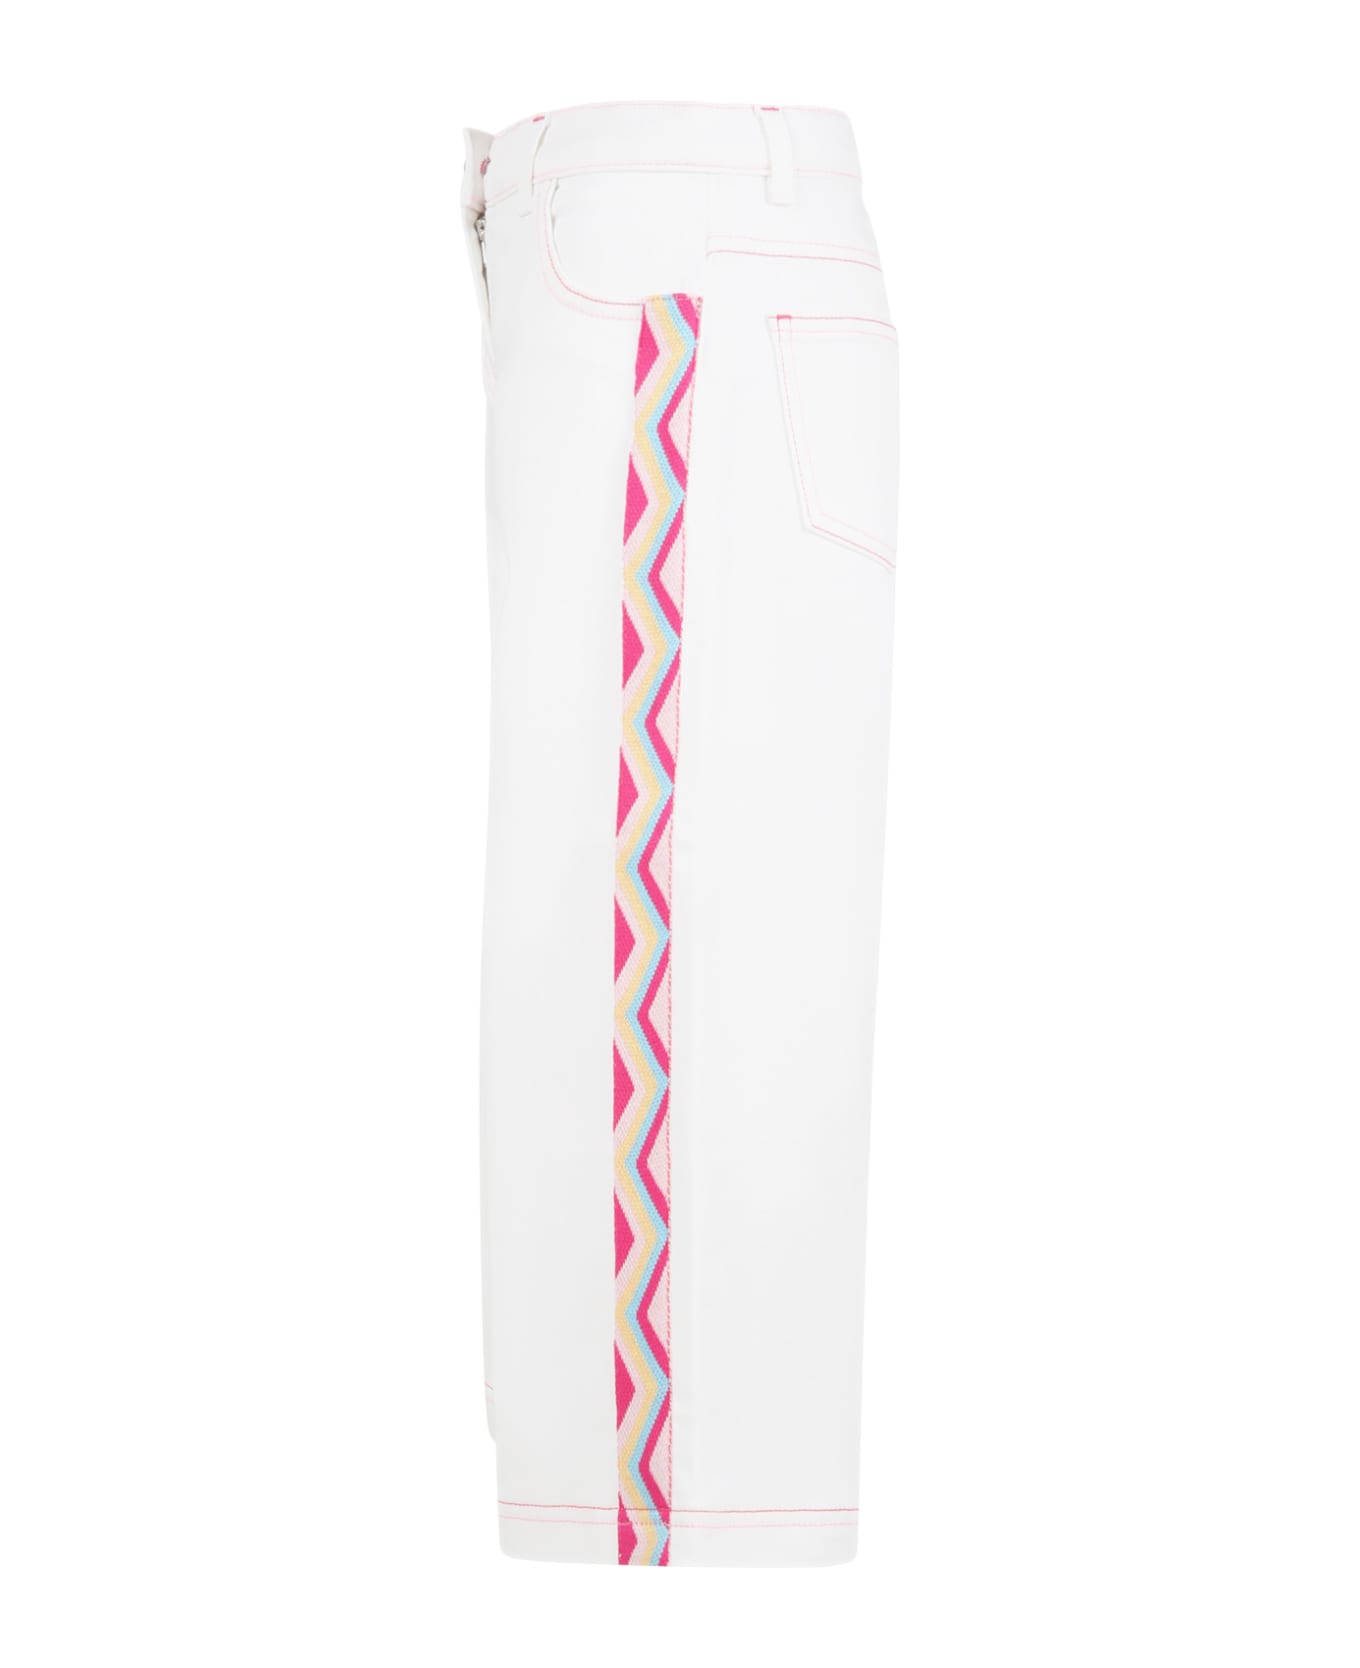 Missoni Kids White Jeans For Girl With Iconic Chevron Pattern - White